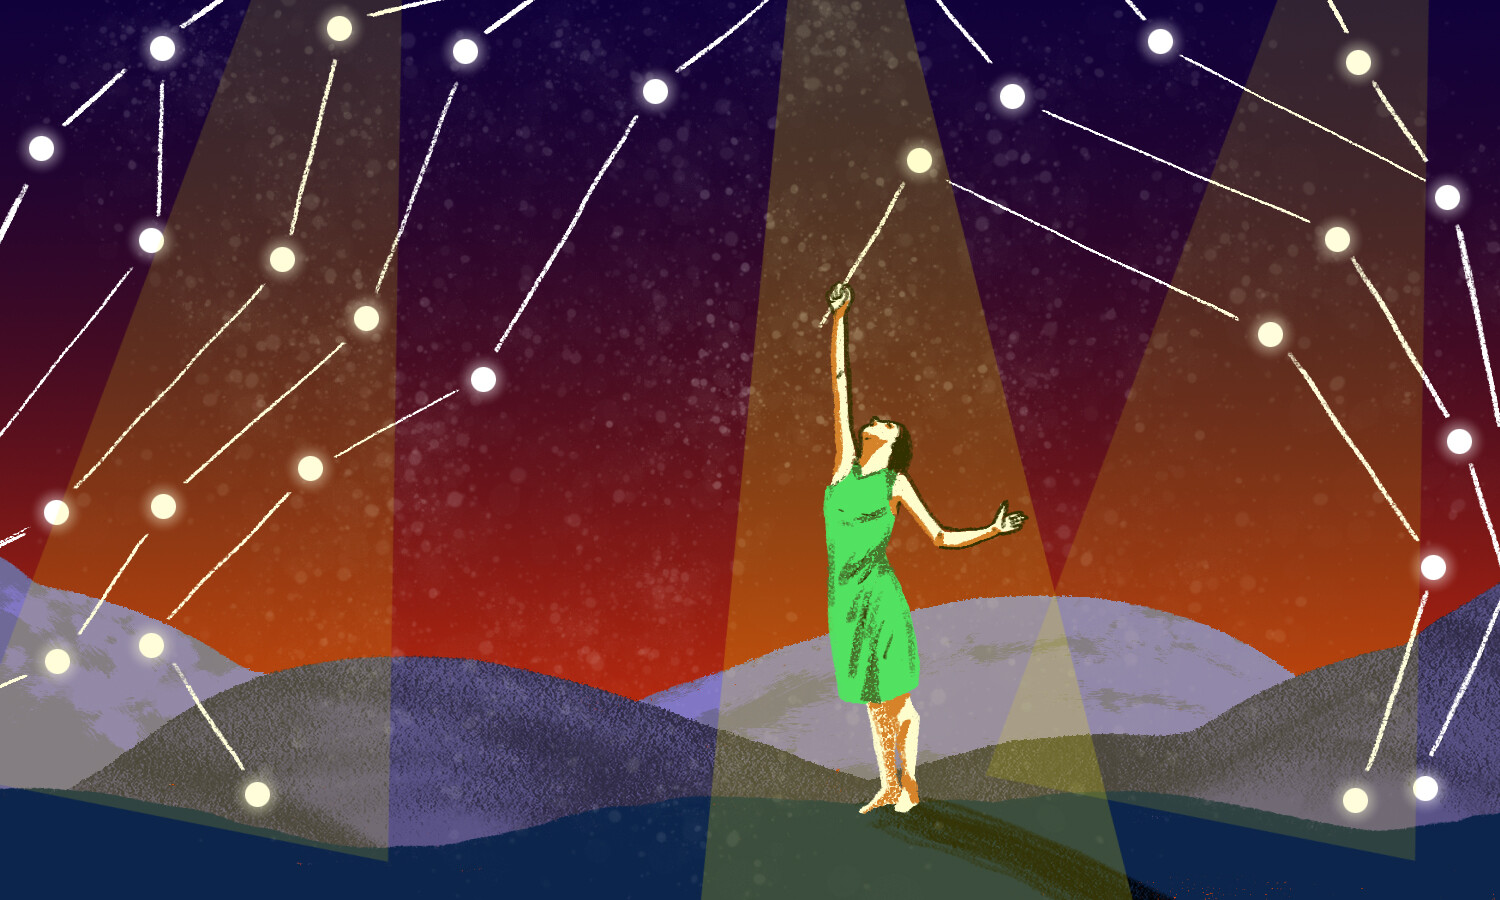 An illustration of a woman in a green dress holding a stick up to a circular light above. She is surrounded by plenty of these lights, each connected by lines.